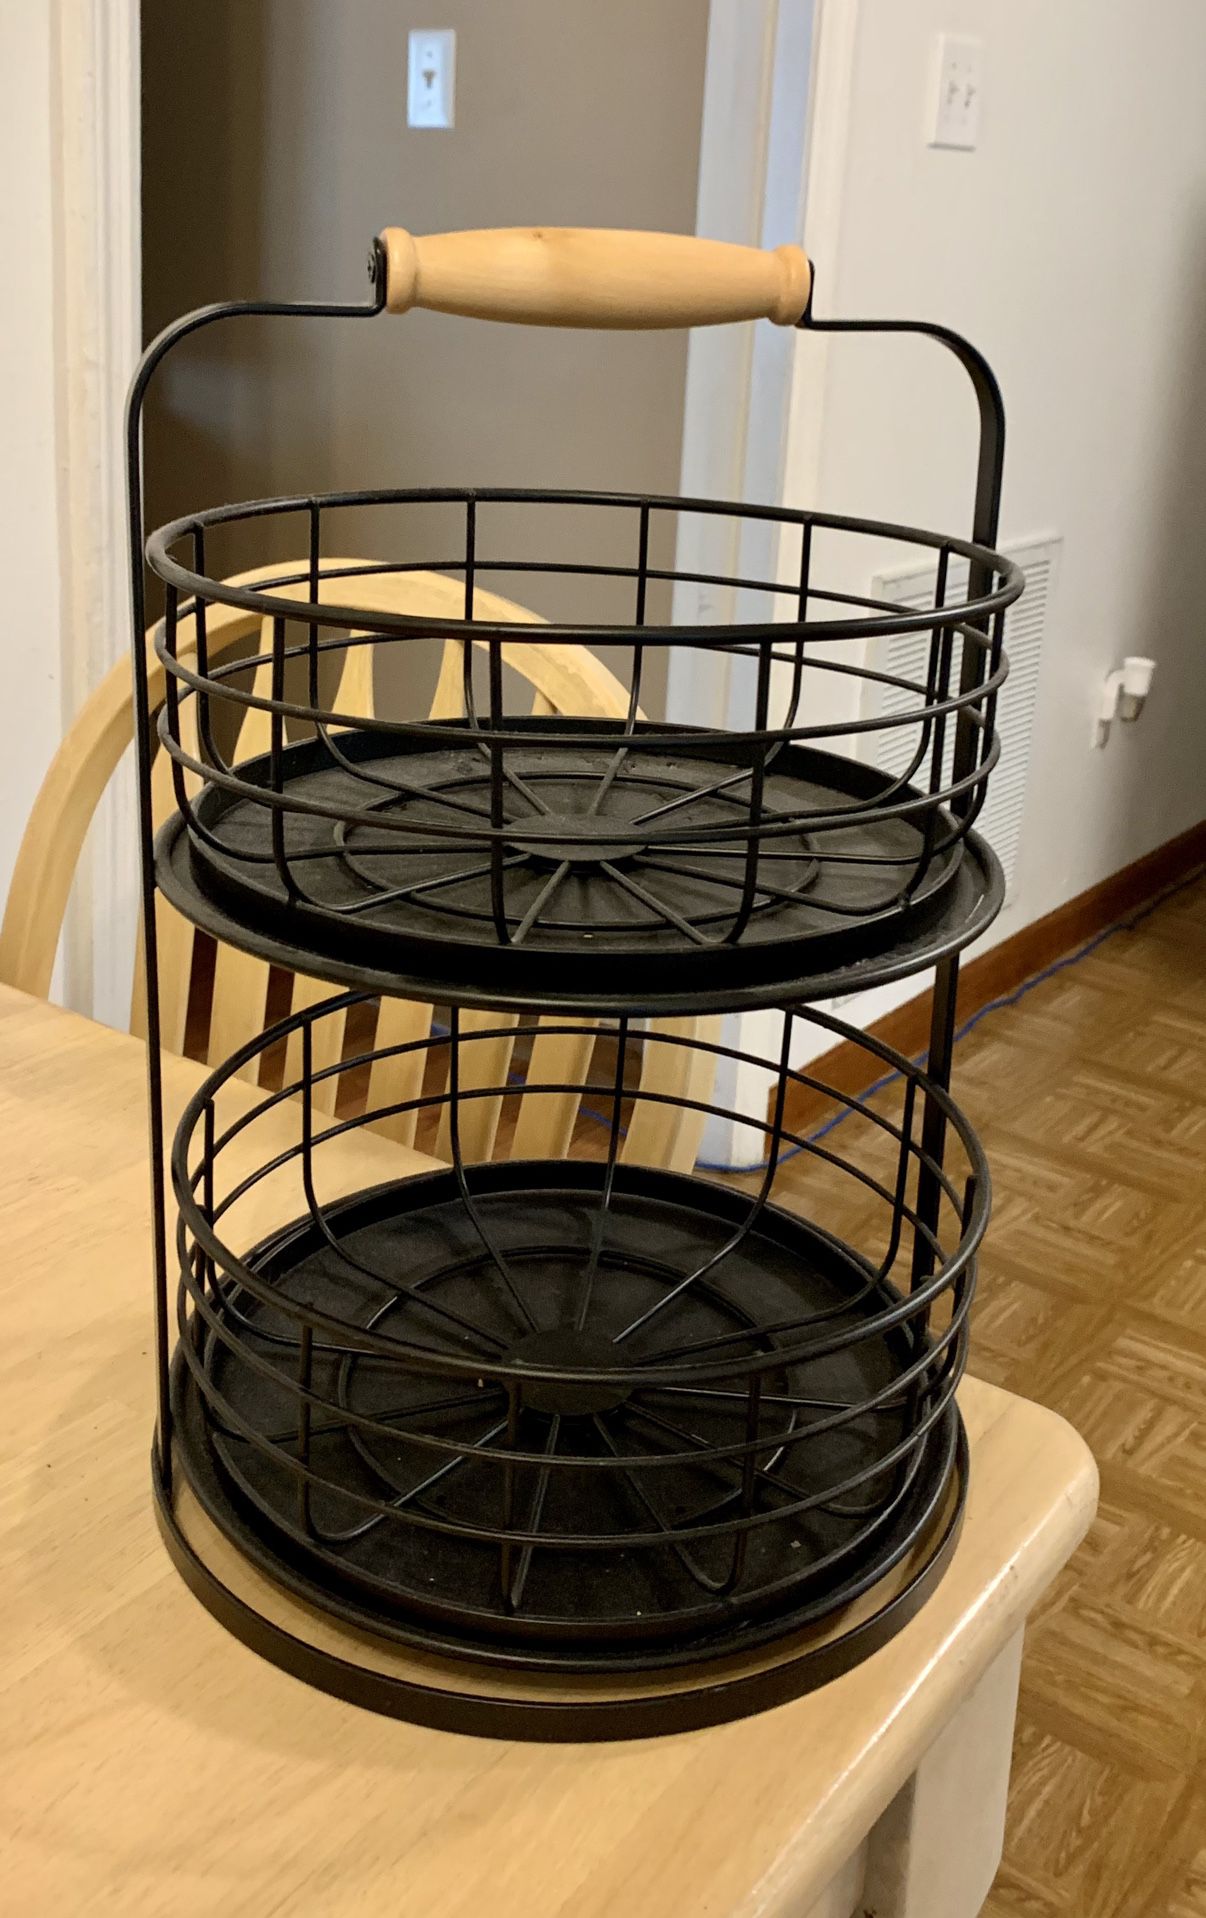 Two Tier Metal Baskets